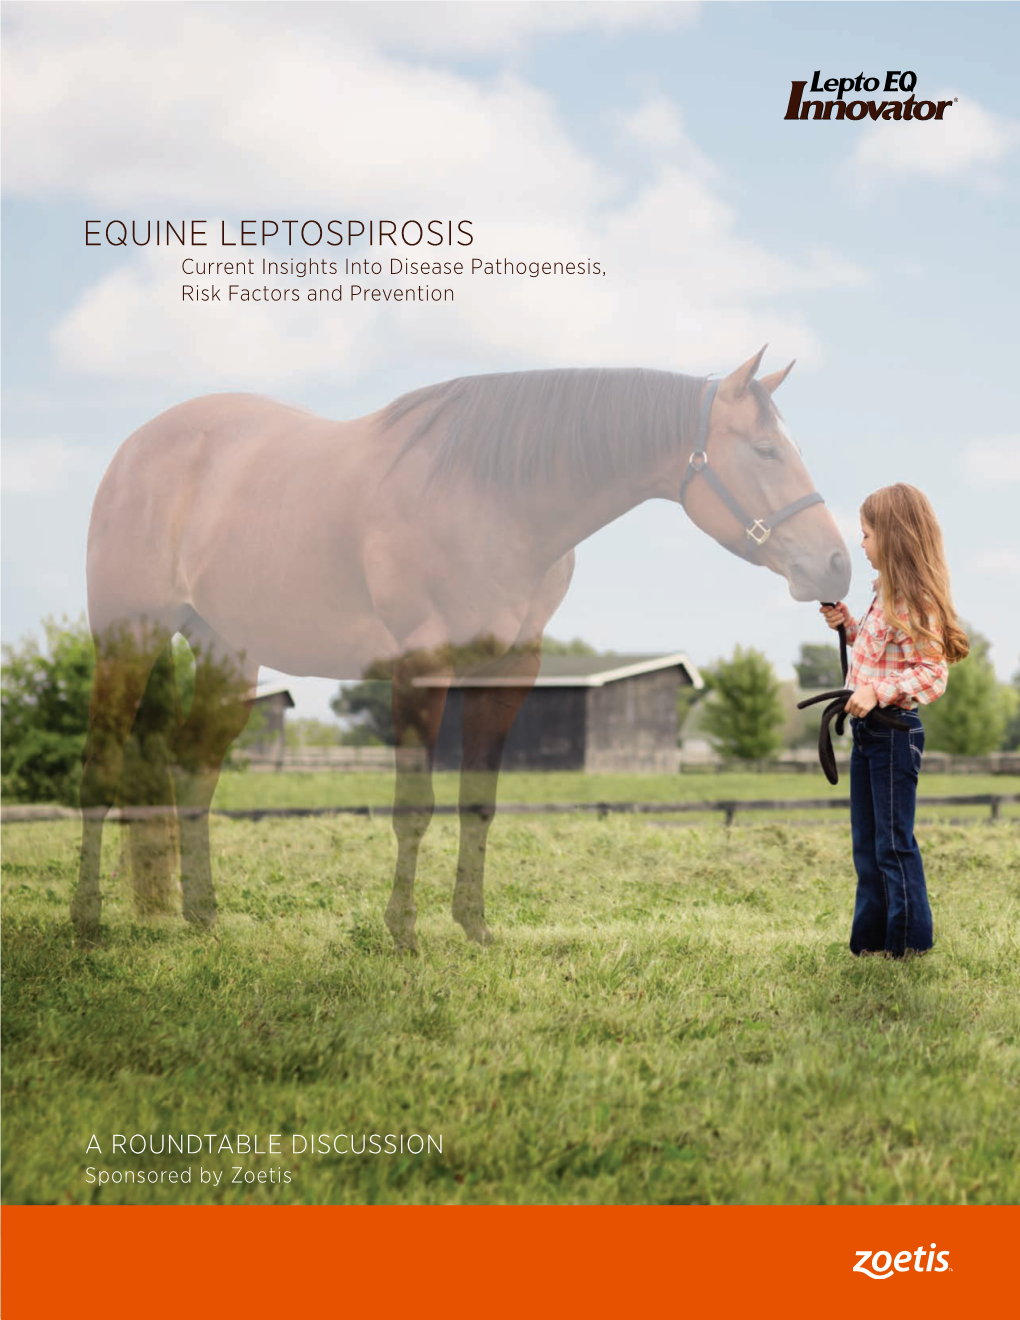 EQUINE LEPTOSPIROSIS Current Insights Into Disease Pathogenesis, Risk Factors and Prevention